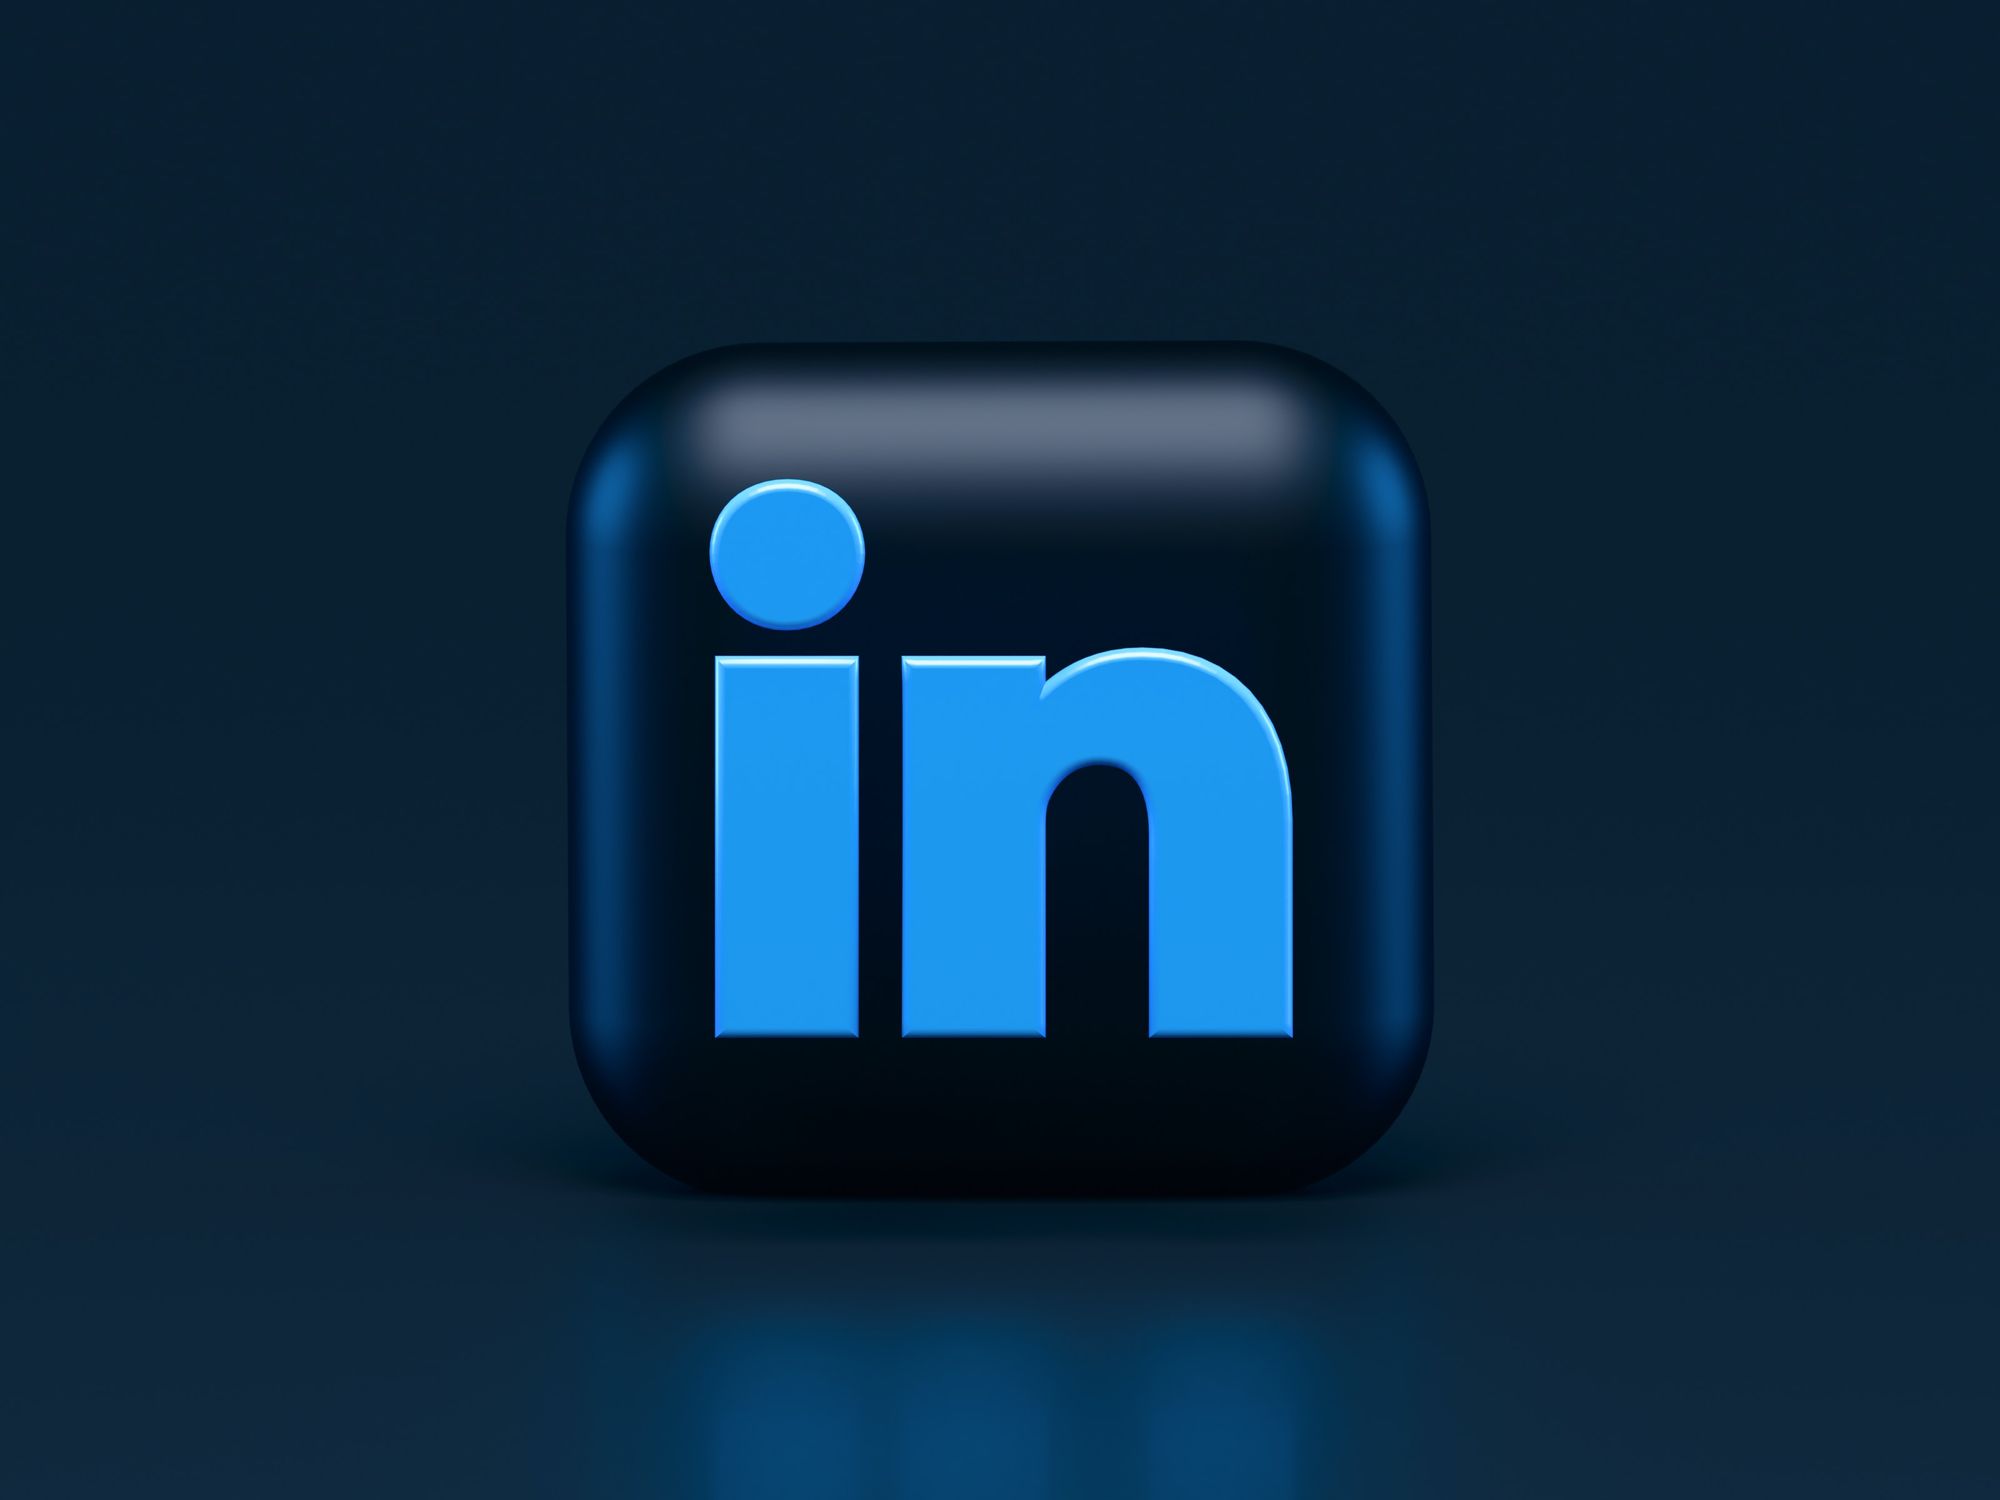 How to Optimize Your LinkedIn Profile for Job Search